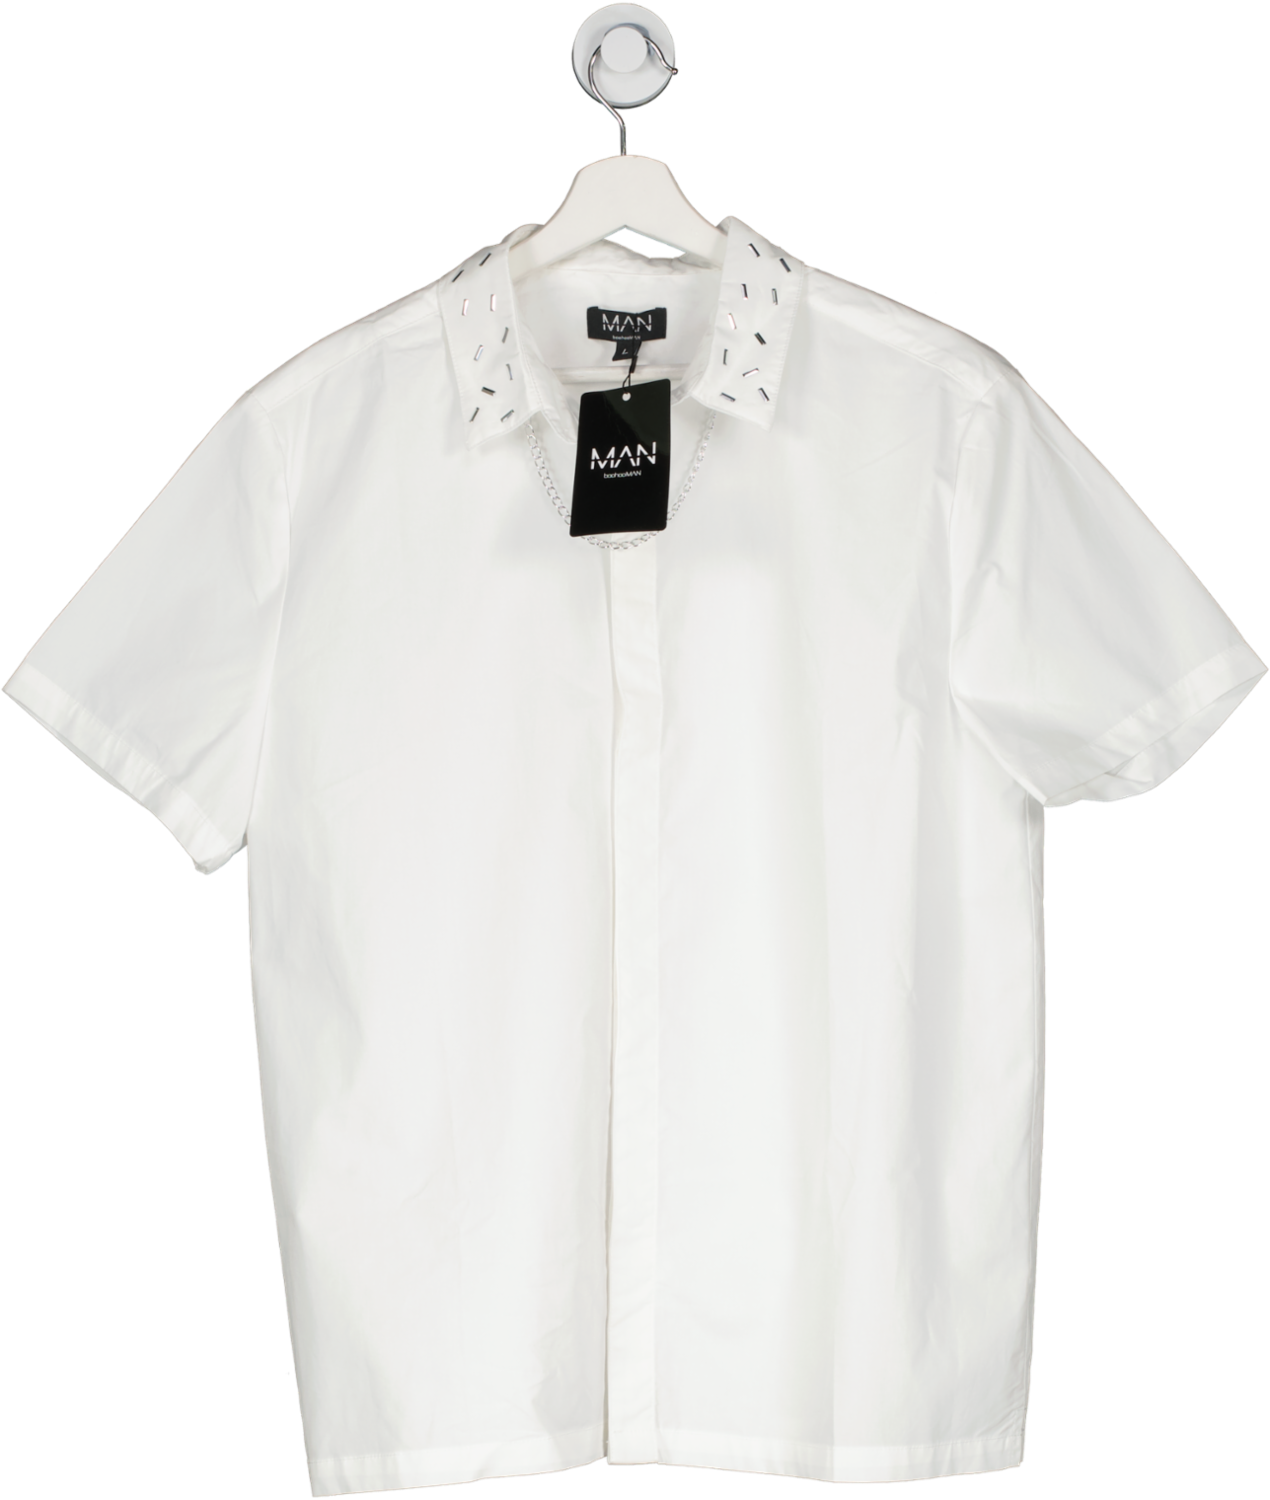 boohooMan White Star Studded Shirt With Pearl Chain Detail Shirt UK L